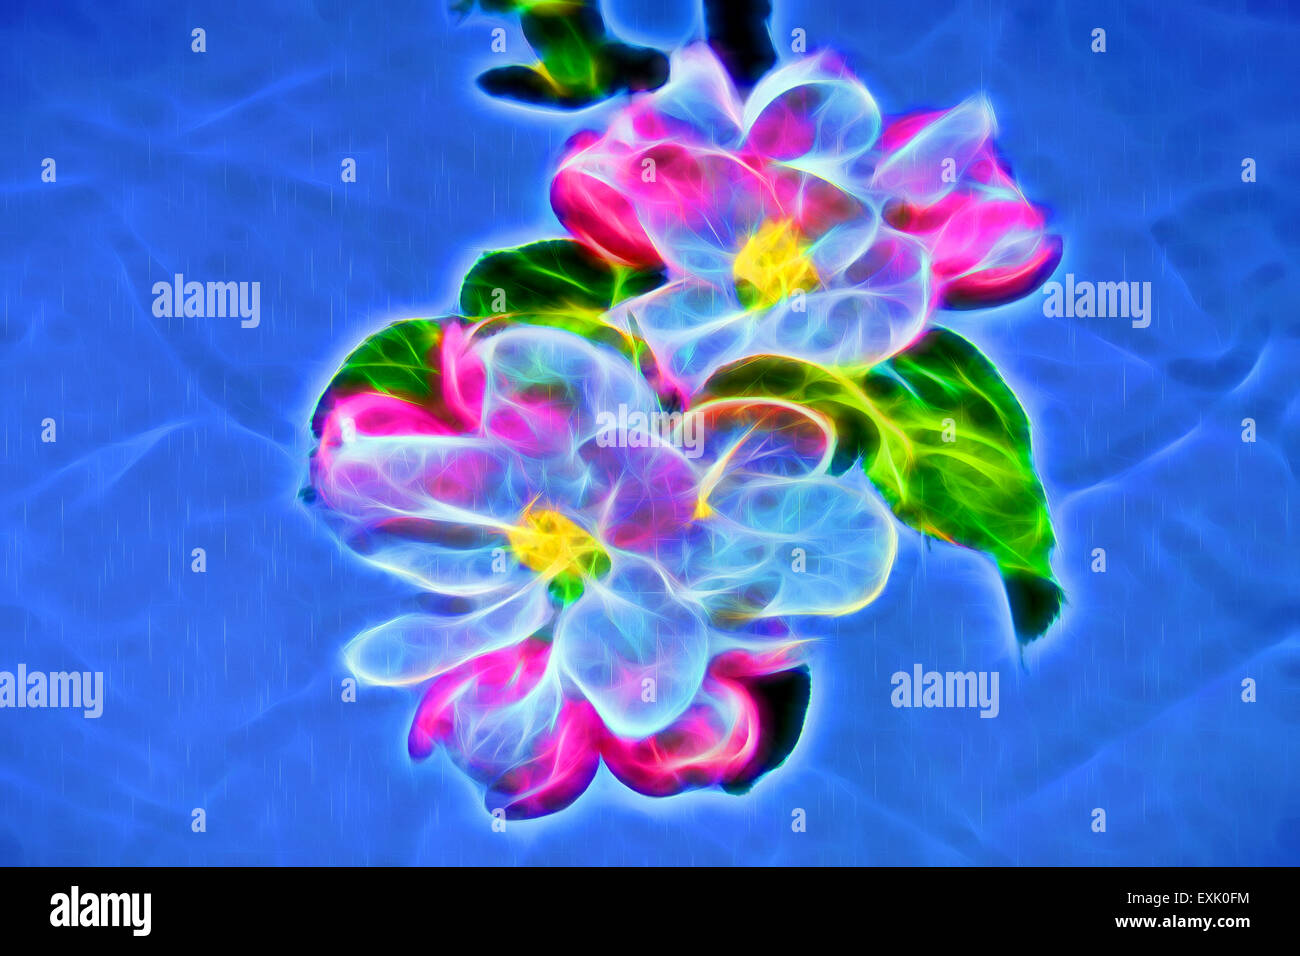 Computer generated artwork of apple blossom Stock Photo